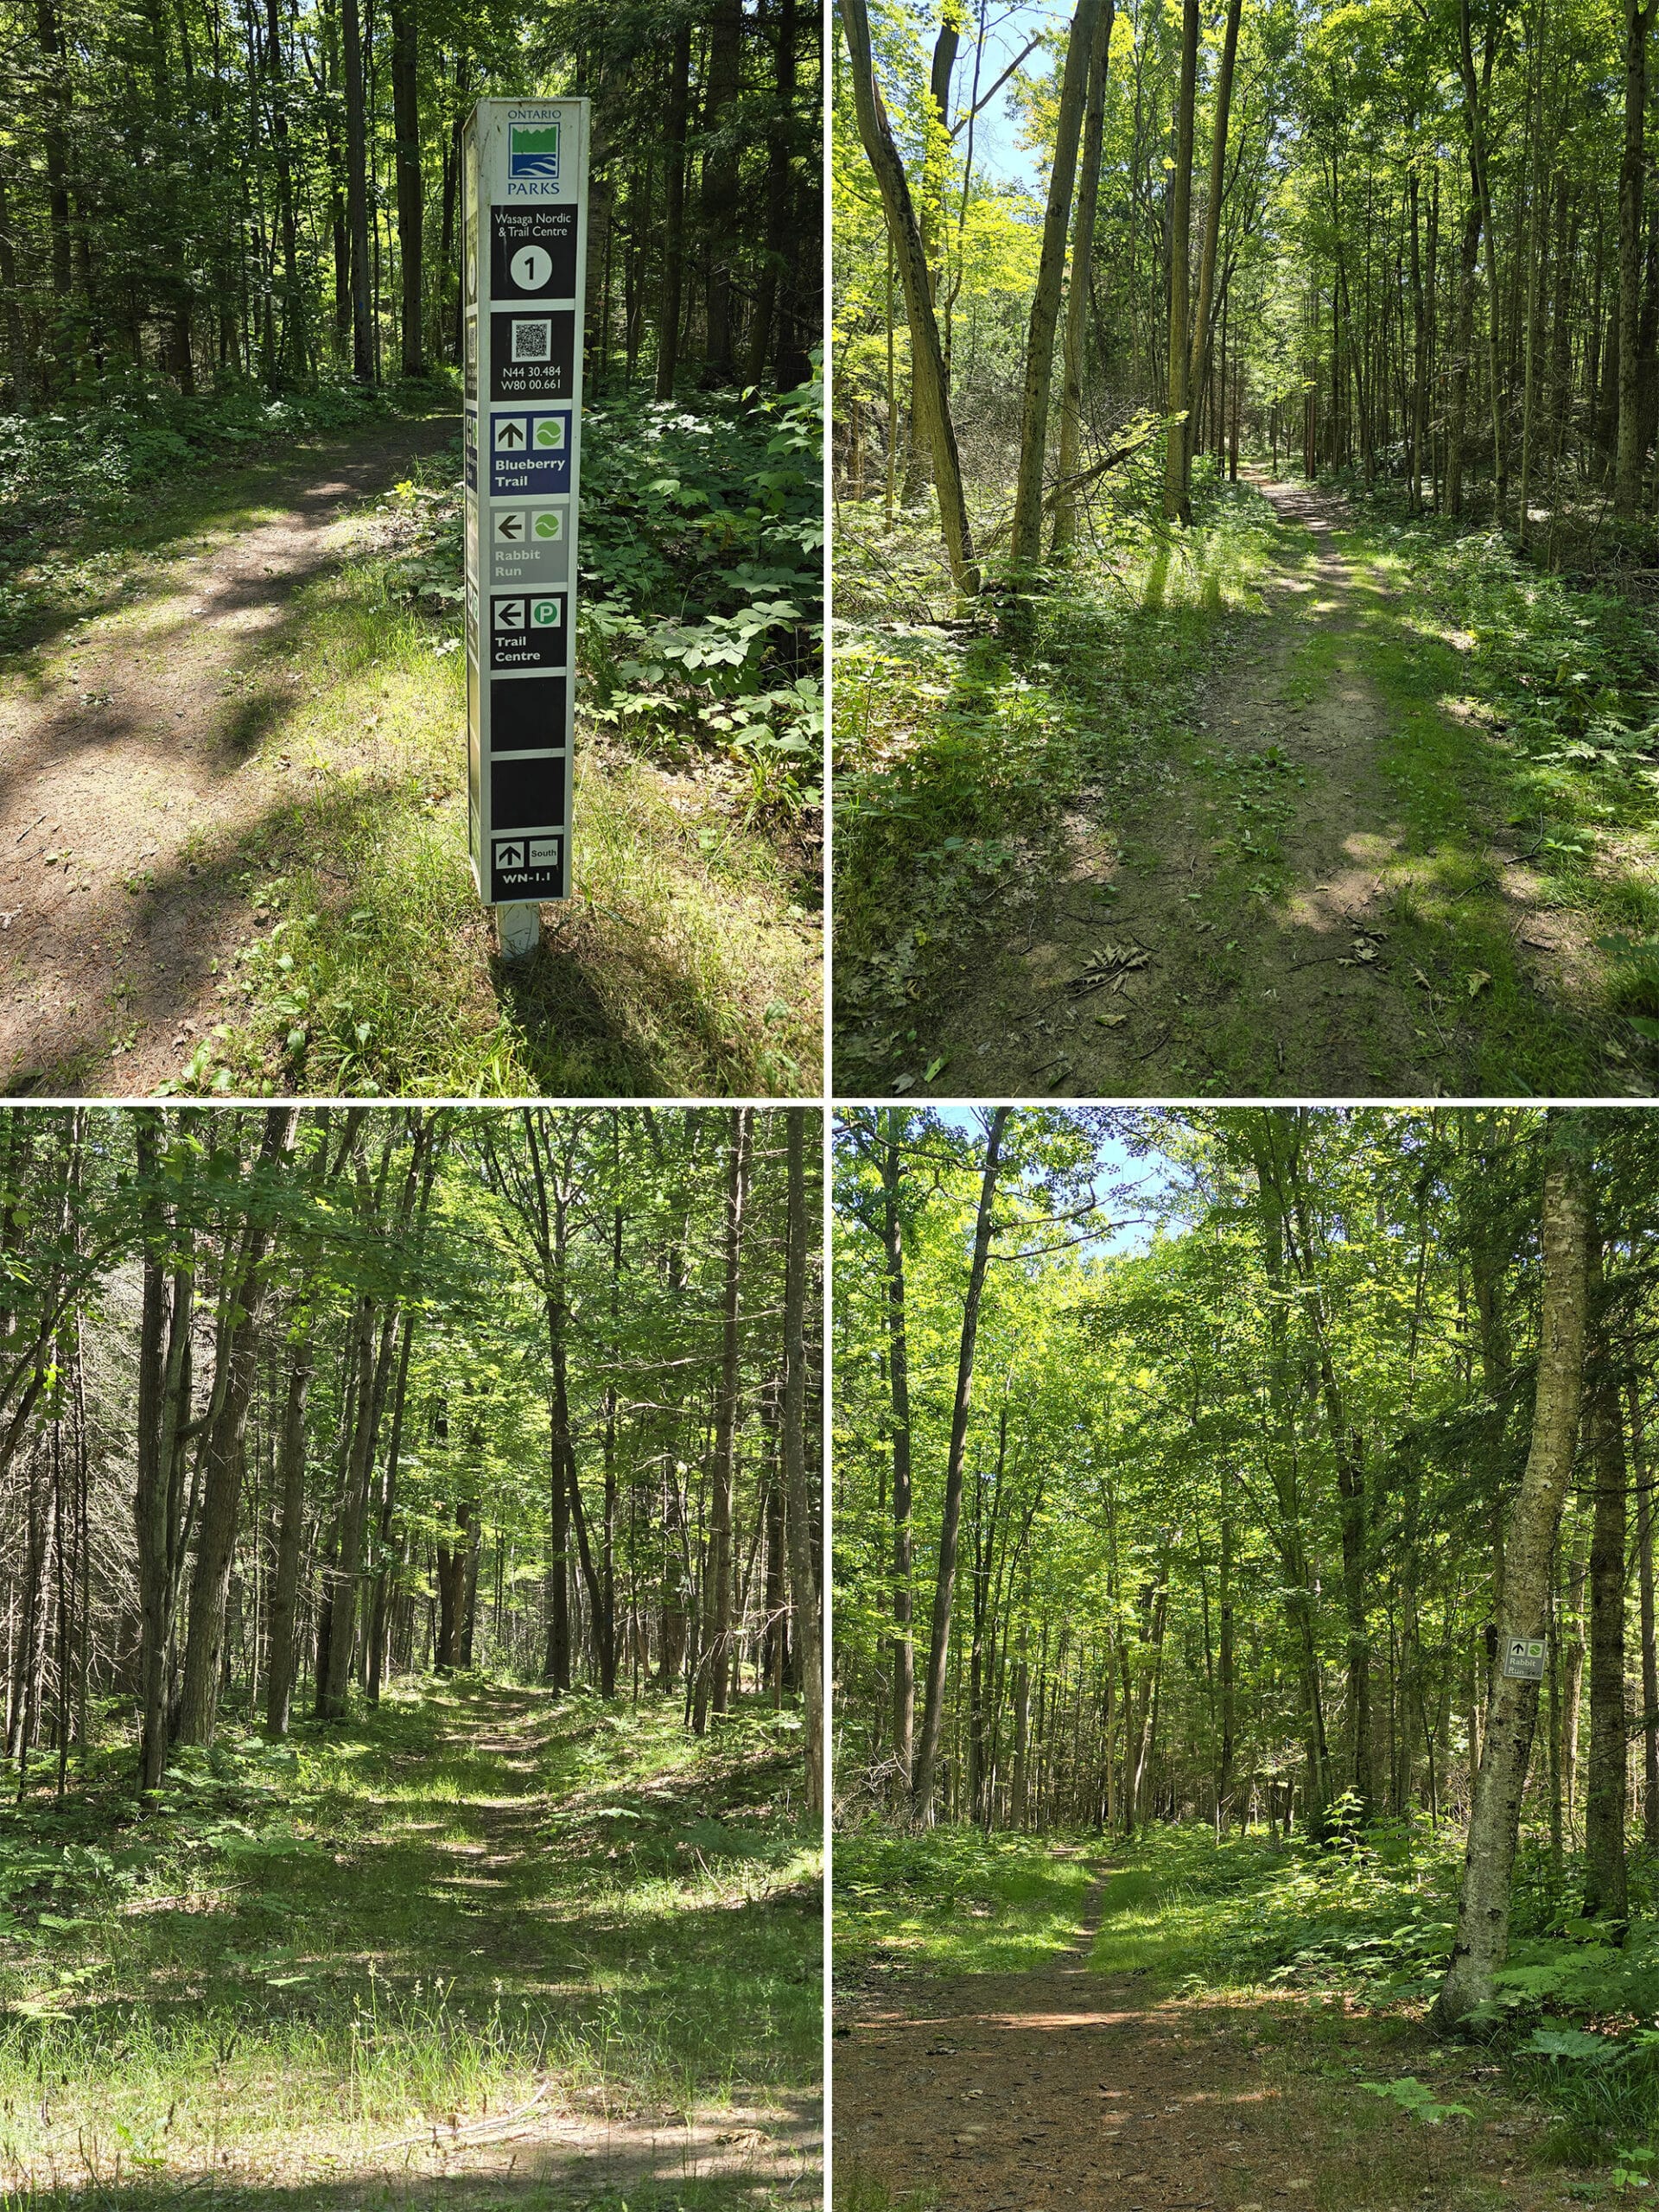 4 part image showing various views on the Wasaga Beach hiking trails.